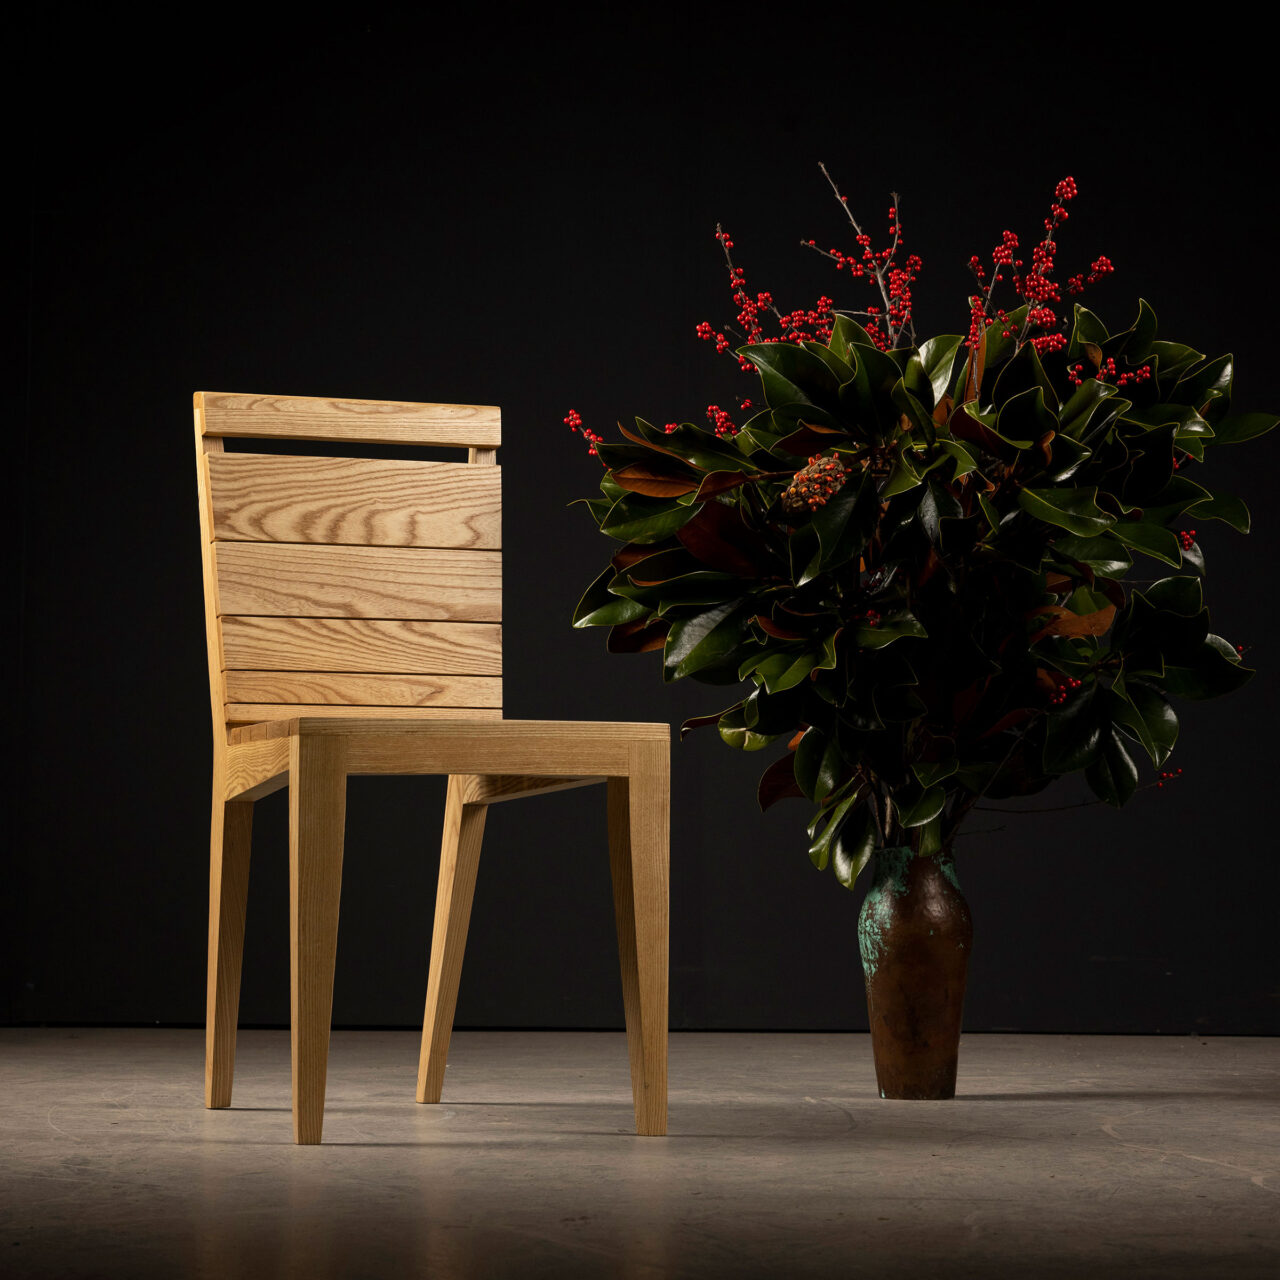 Unique dining chairs - a minimalist wooden Angels chair by SENTIENT Furniture, showcasing a natural oak finish with clear lines and a modern silhouette against a black backdrop with a large, leafy green plant and red berries to the side.